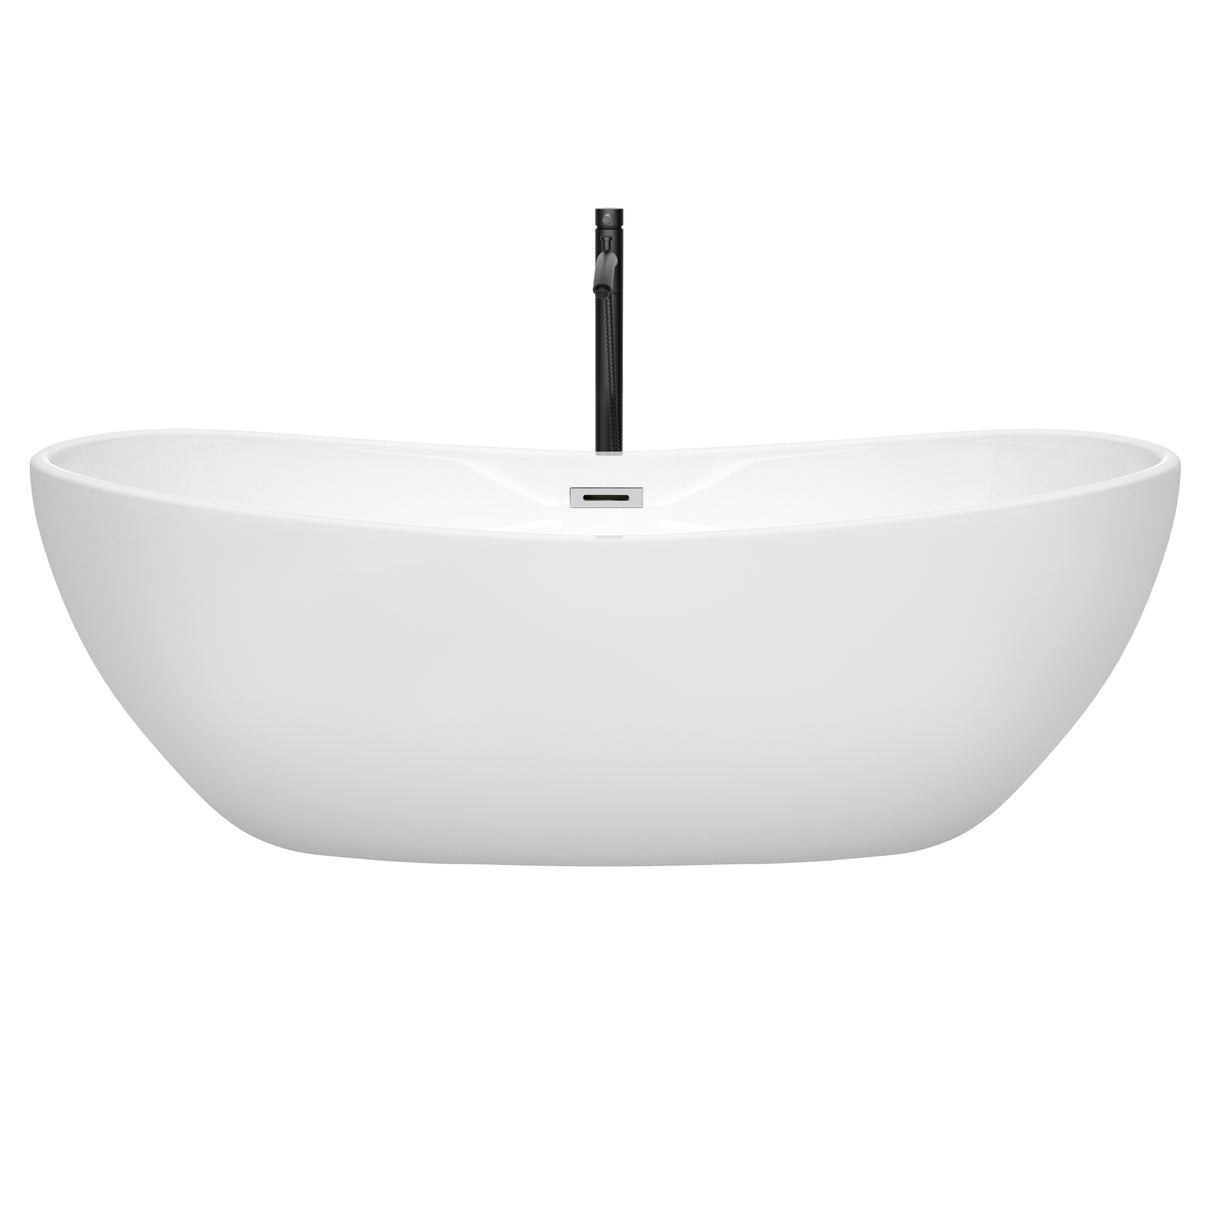 Rebecca 70 Inch Freestanding Bathtub in White with Polished Chrome Trim and Floor Mounted Faucet in Matte Black